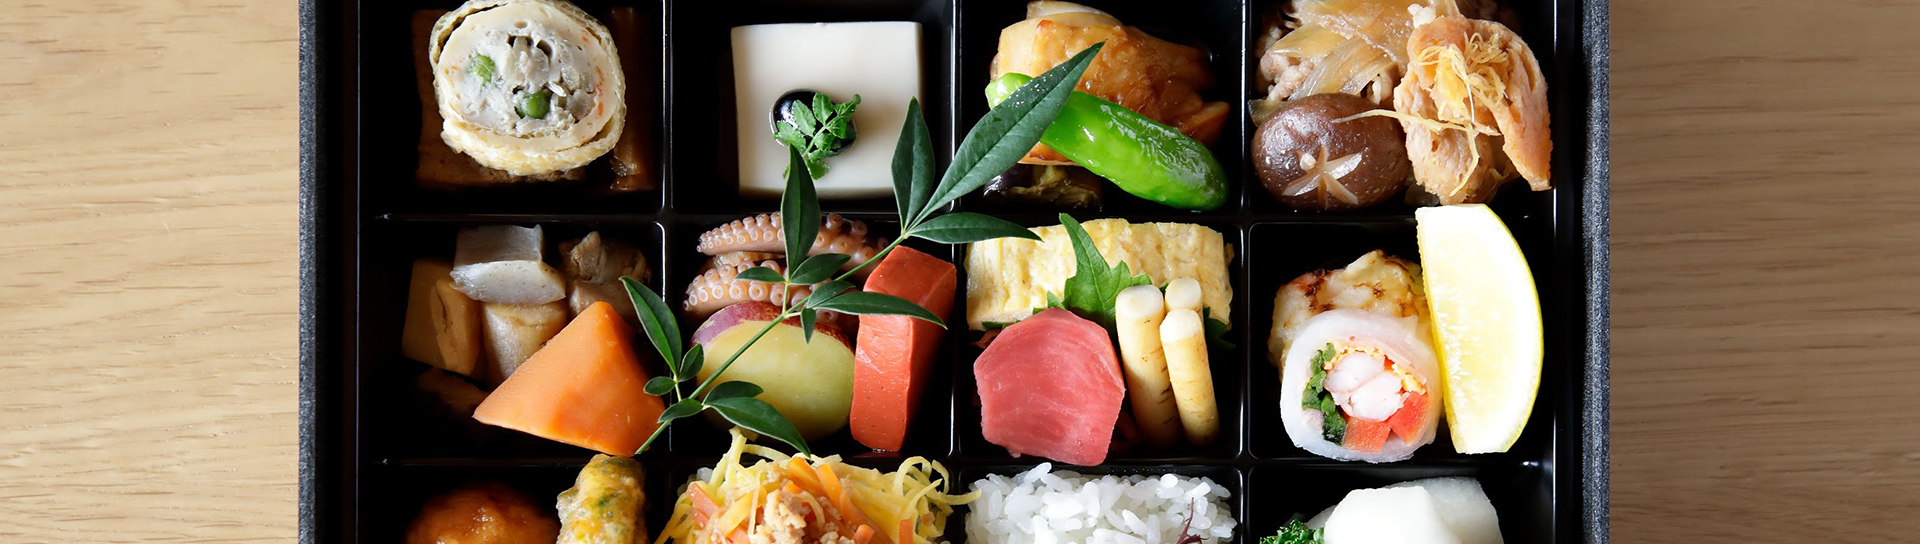 overhead view of bento box filled with food